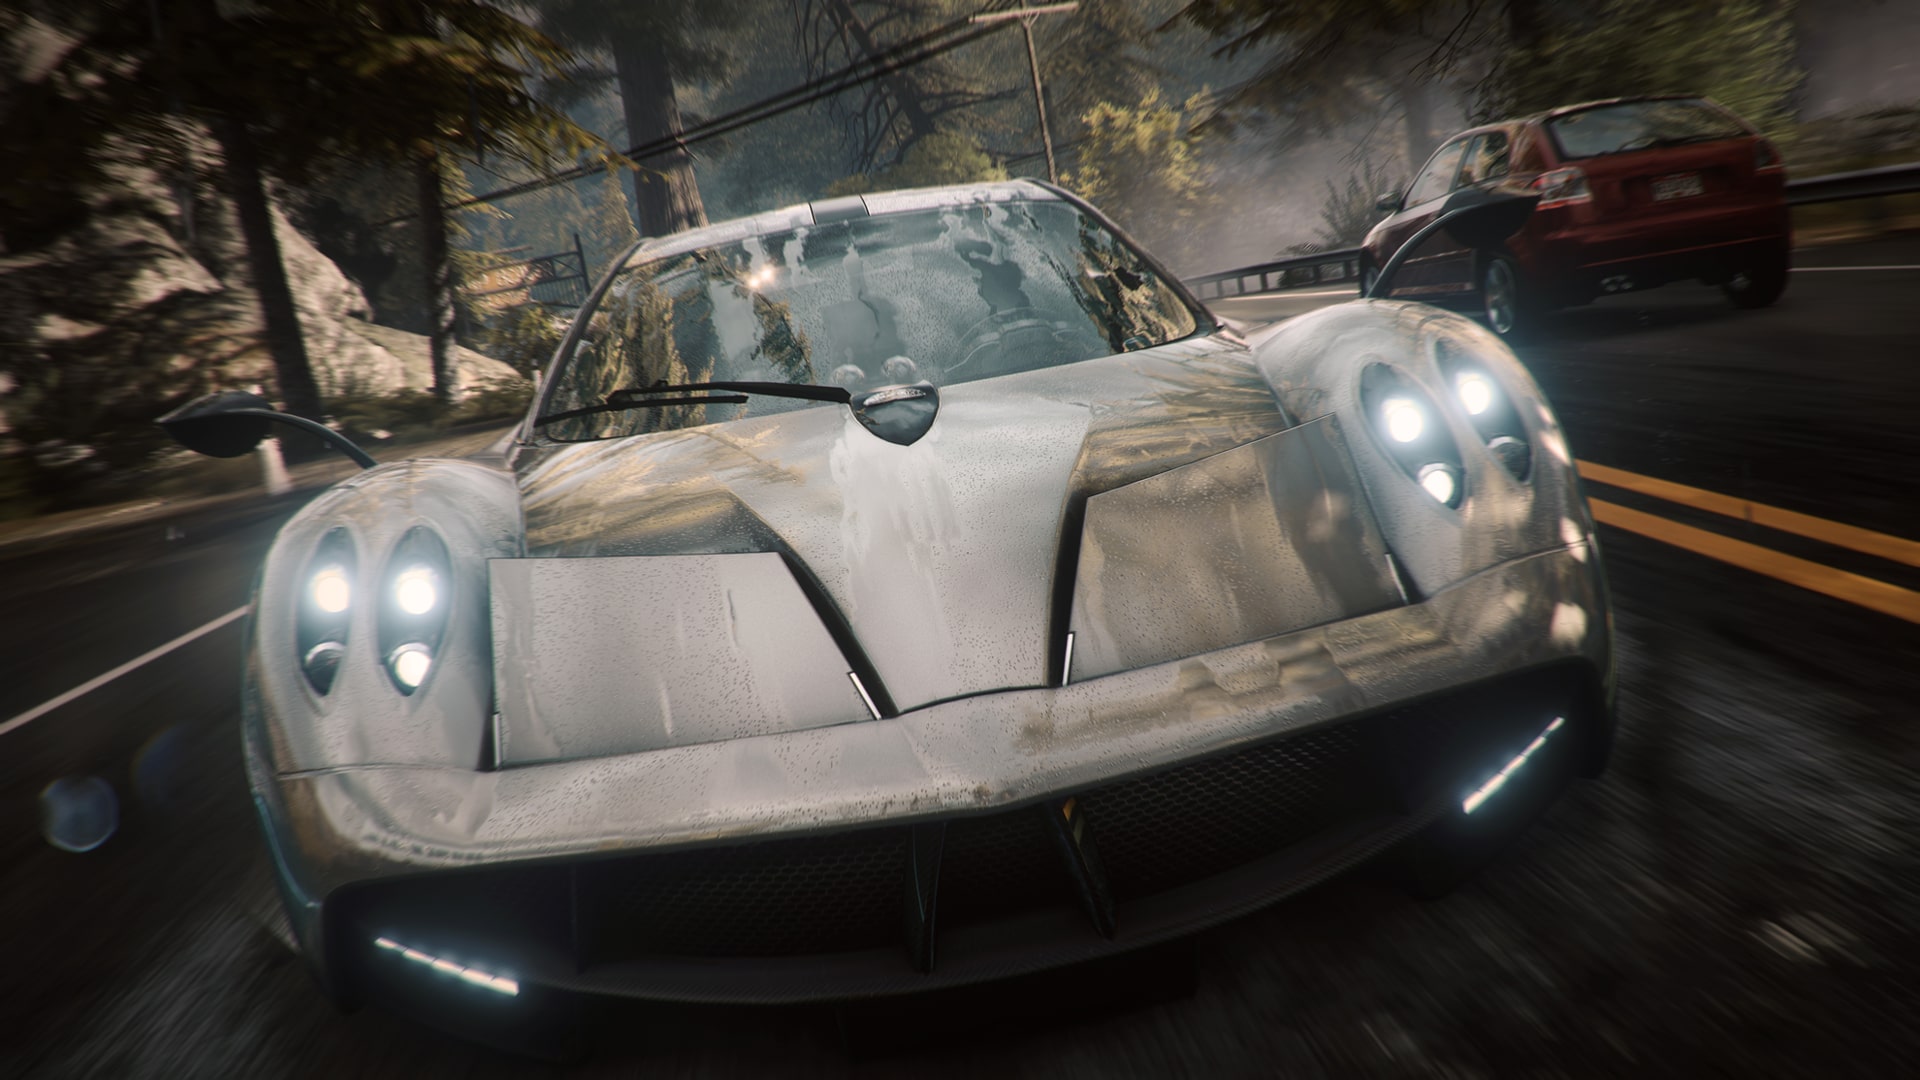 Need for Speed Rivals PS4 Prices Digital or Physical Edition